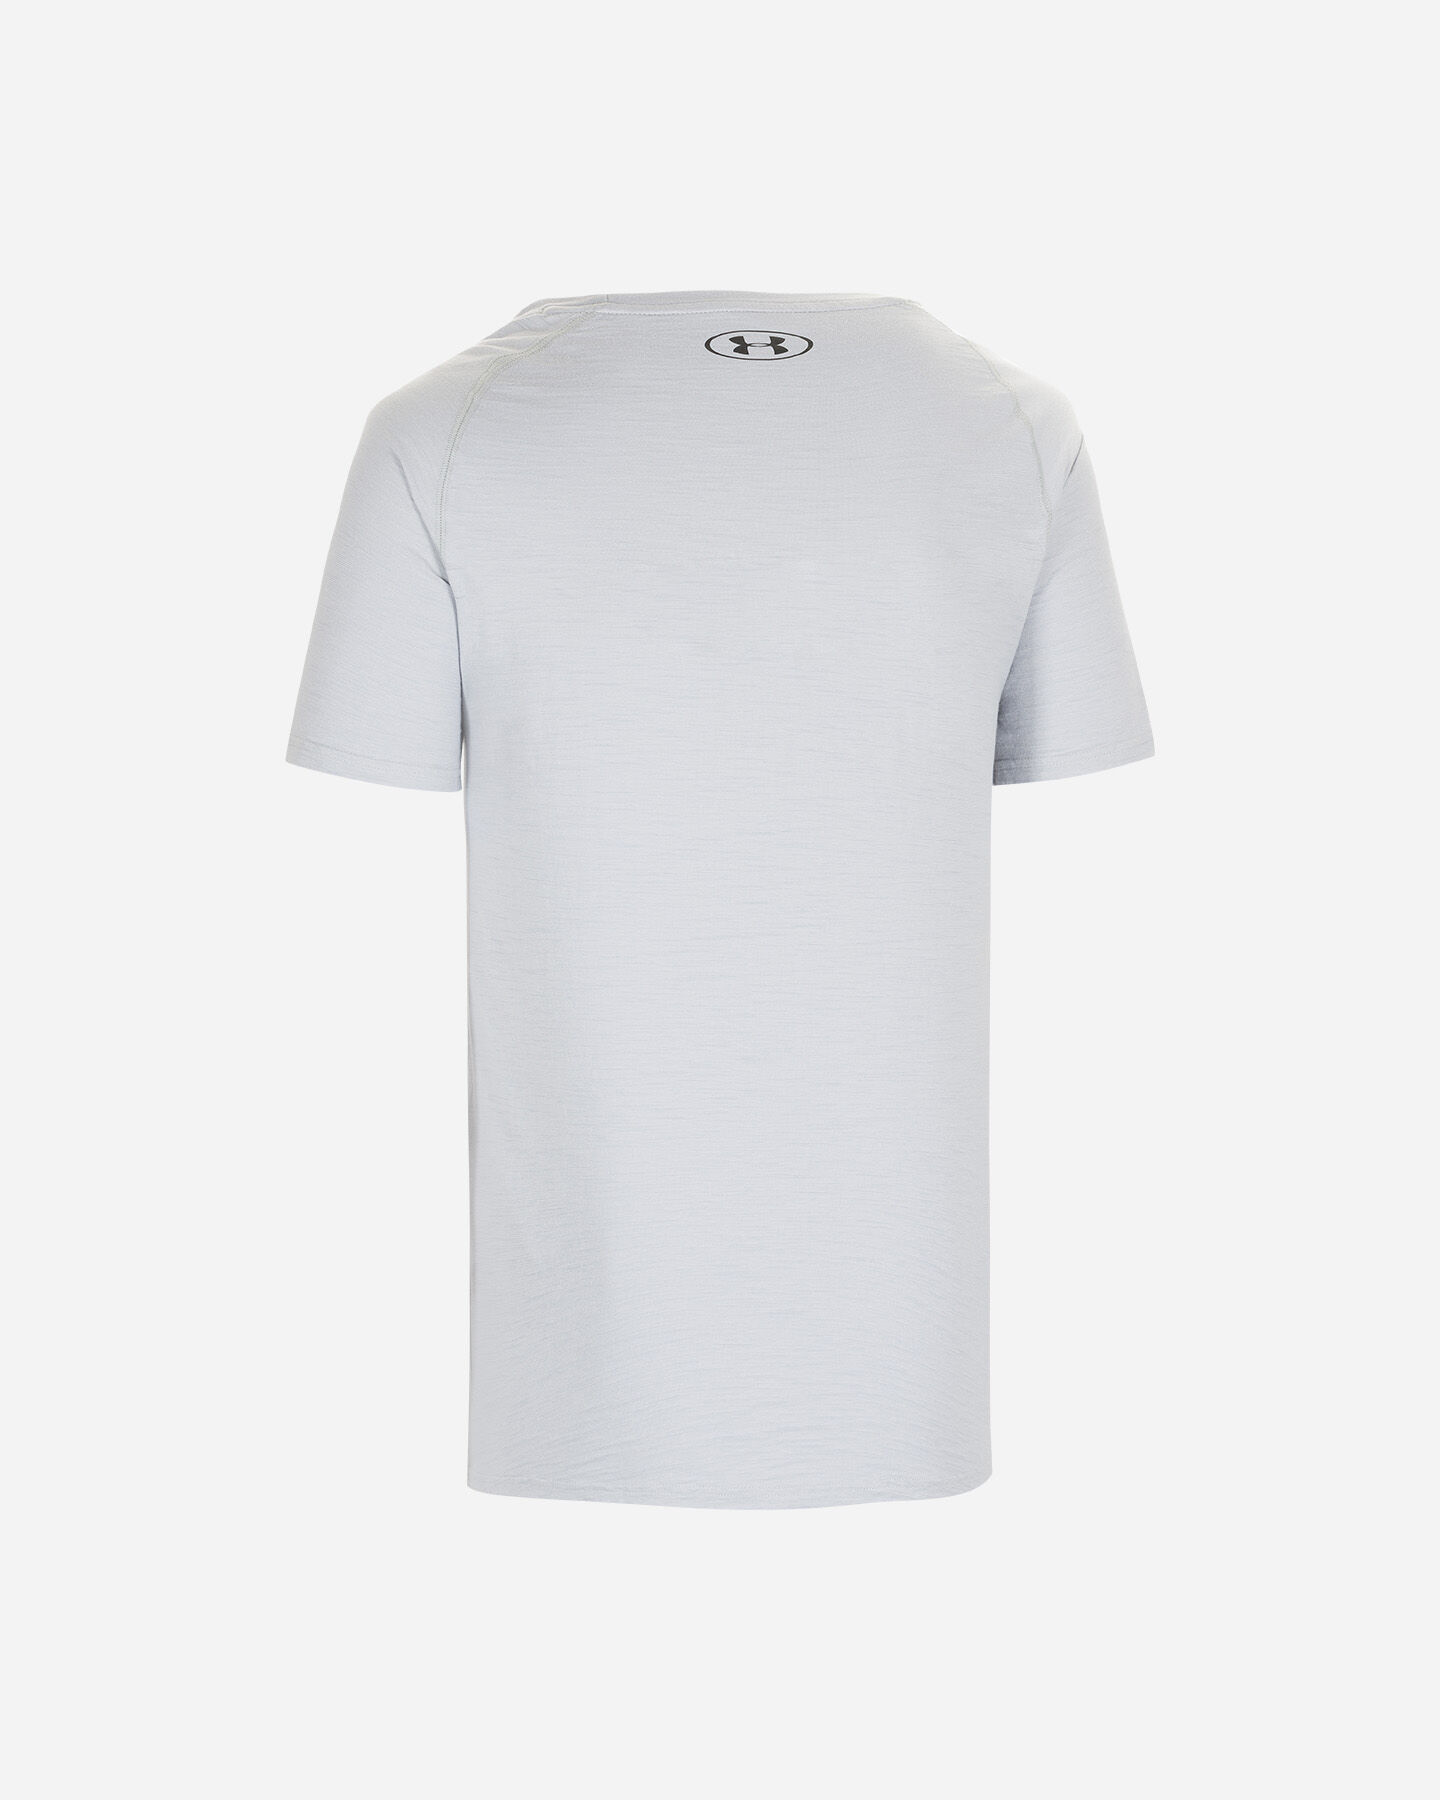  T-Shirt training UNDER ARMOUR CHARGED M S5169036|0011|SM scatto 1